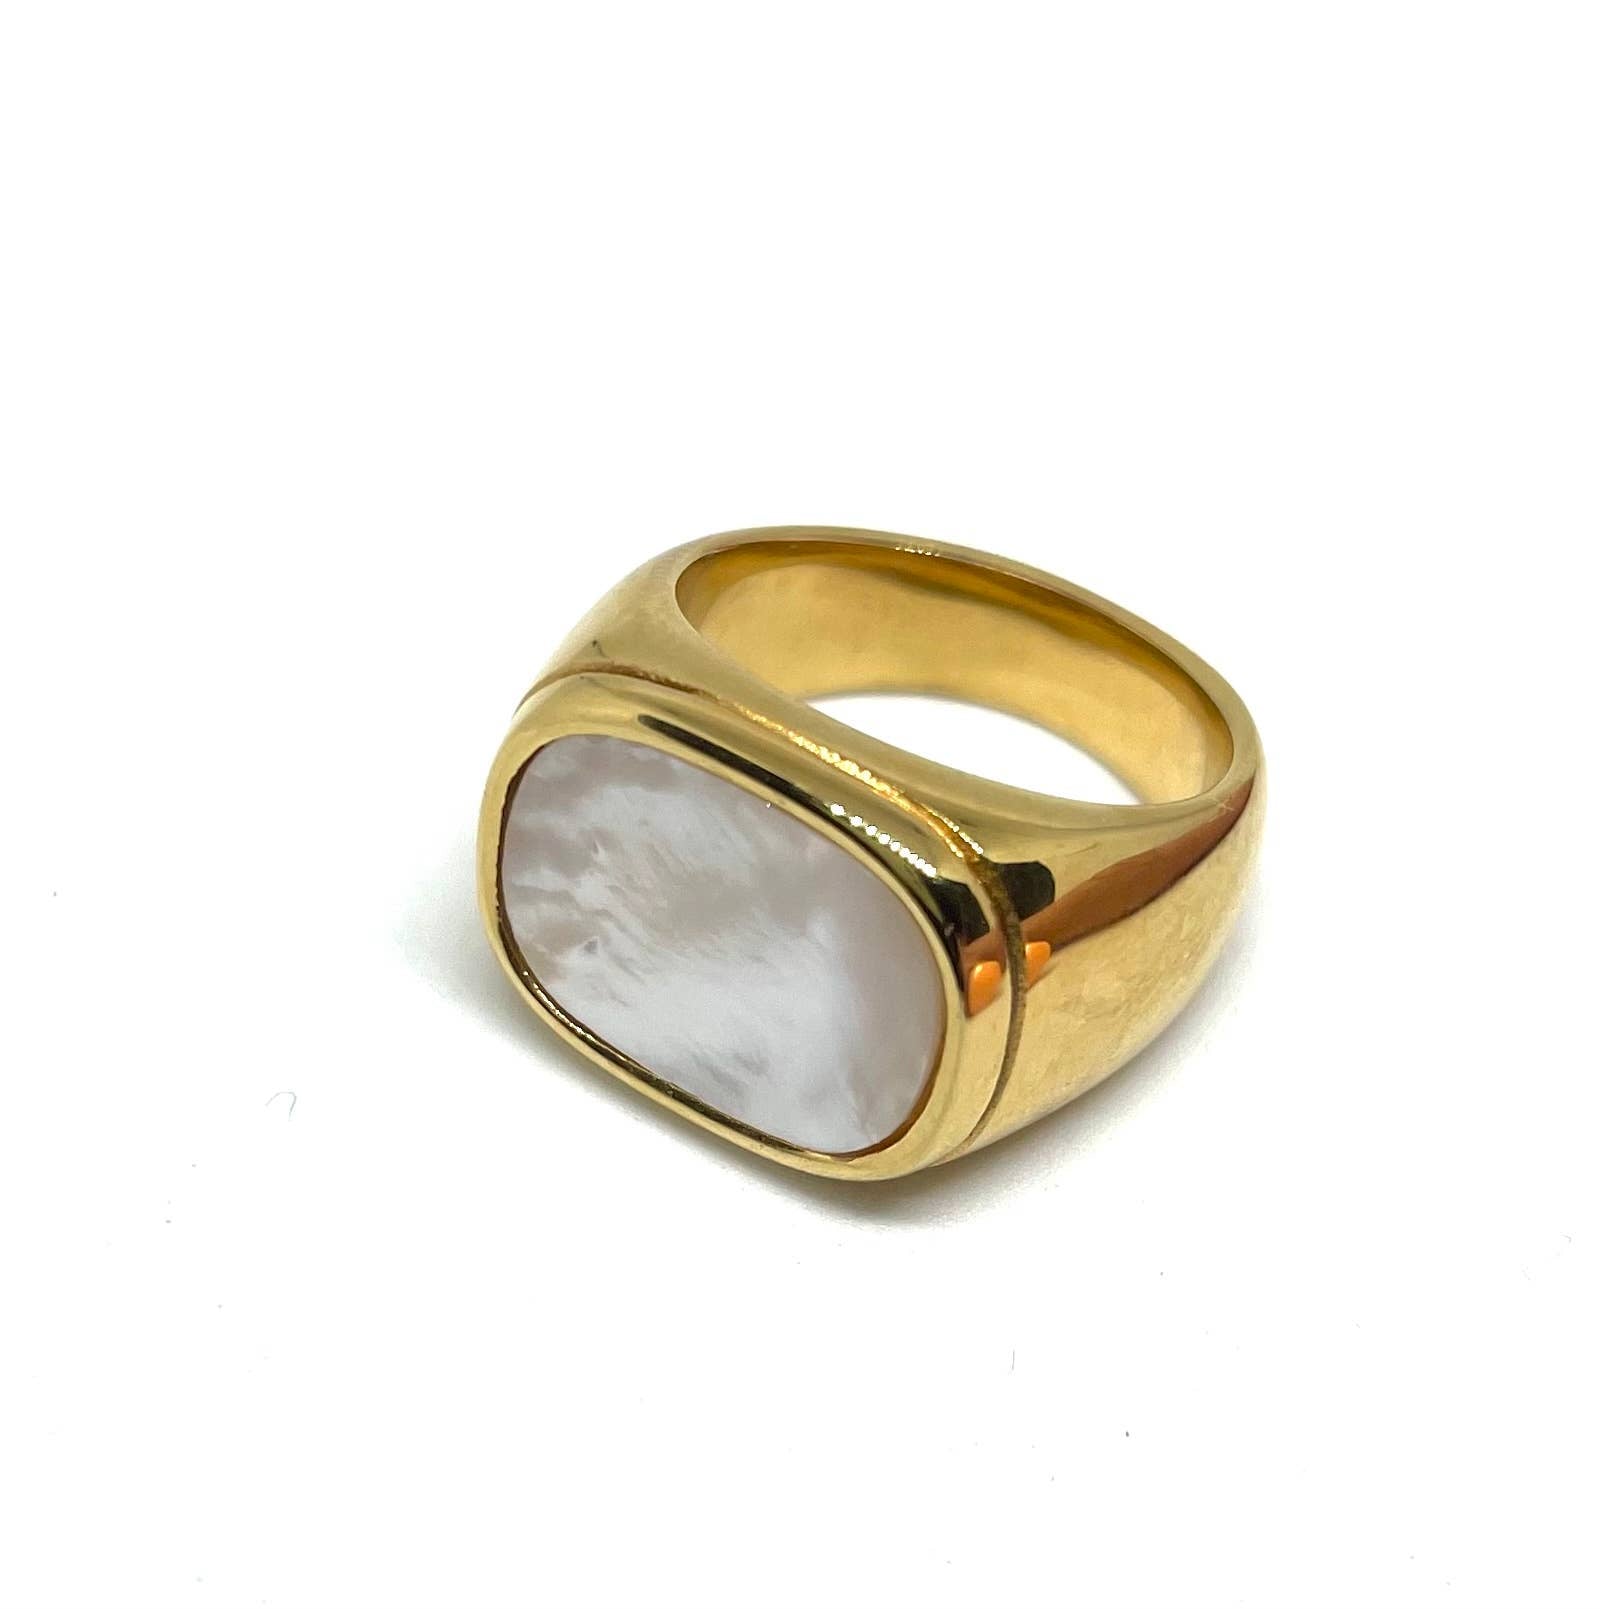 Mother of Pearl Large Face Signet Ring- Stainless Steel/No tarnish - Abigail Fox Designs